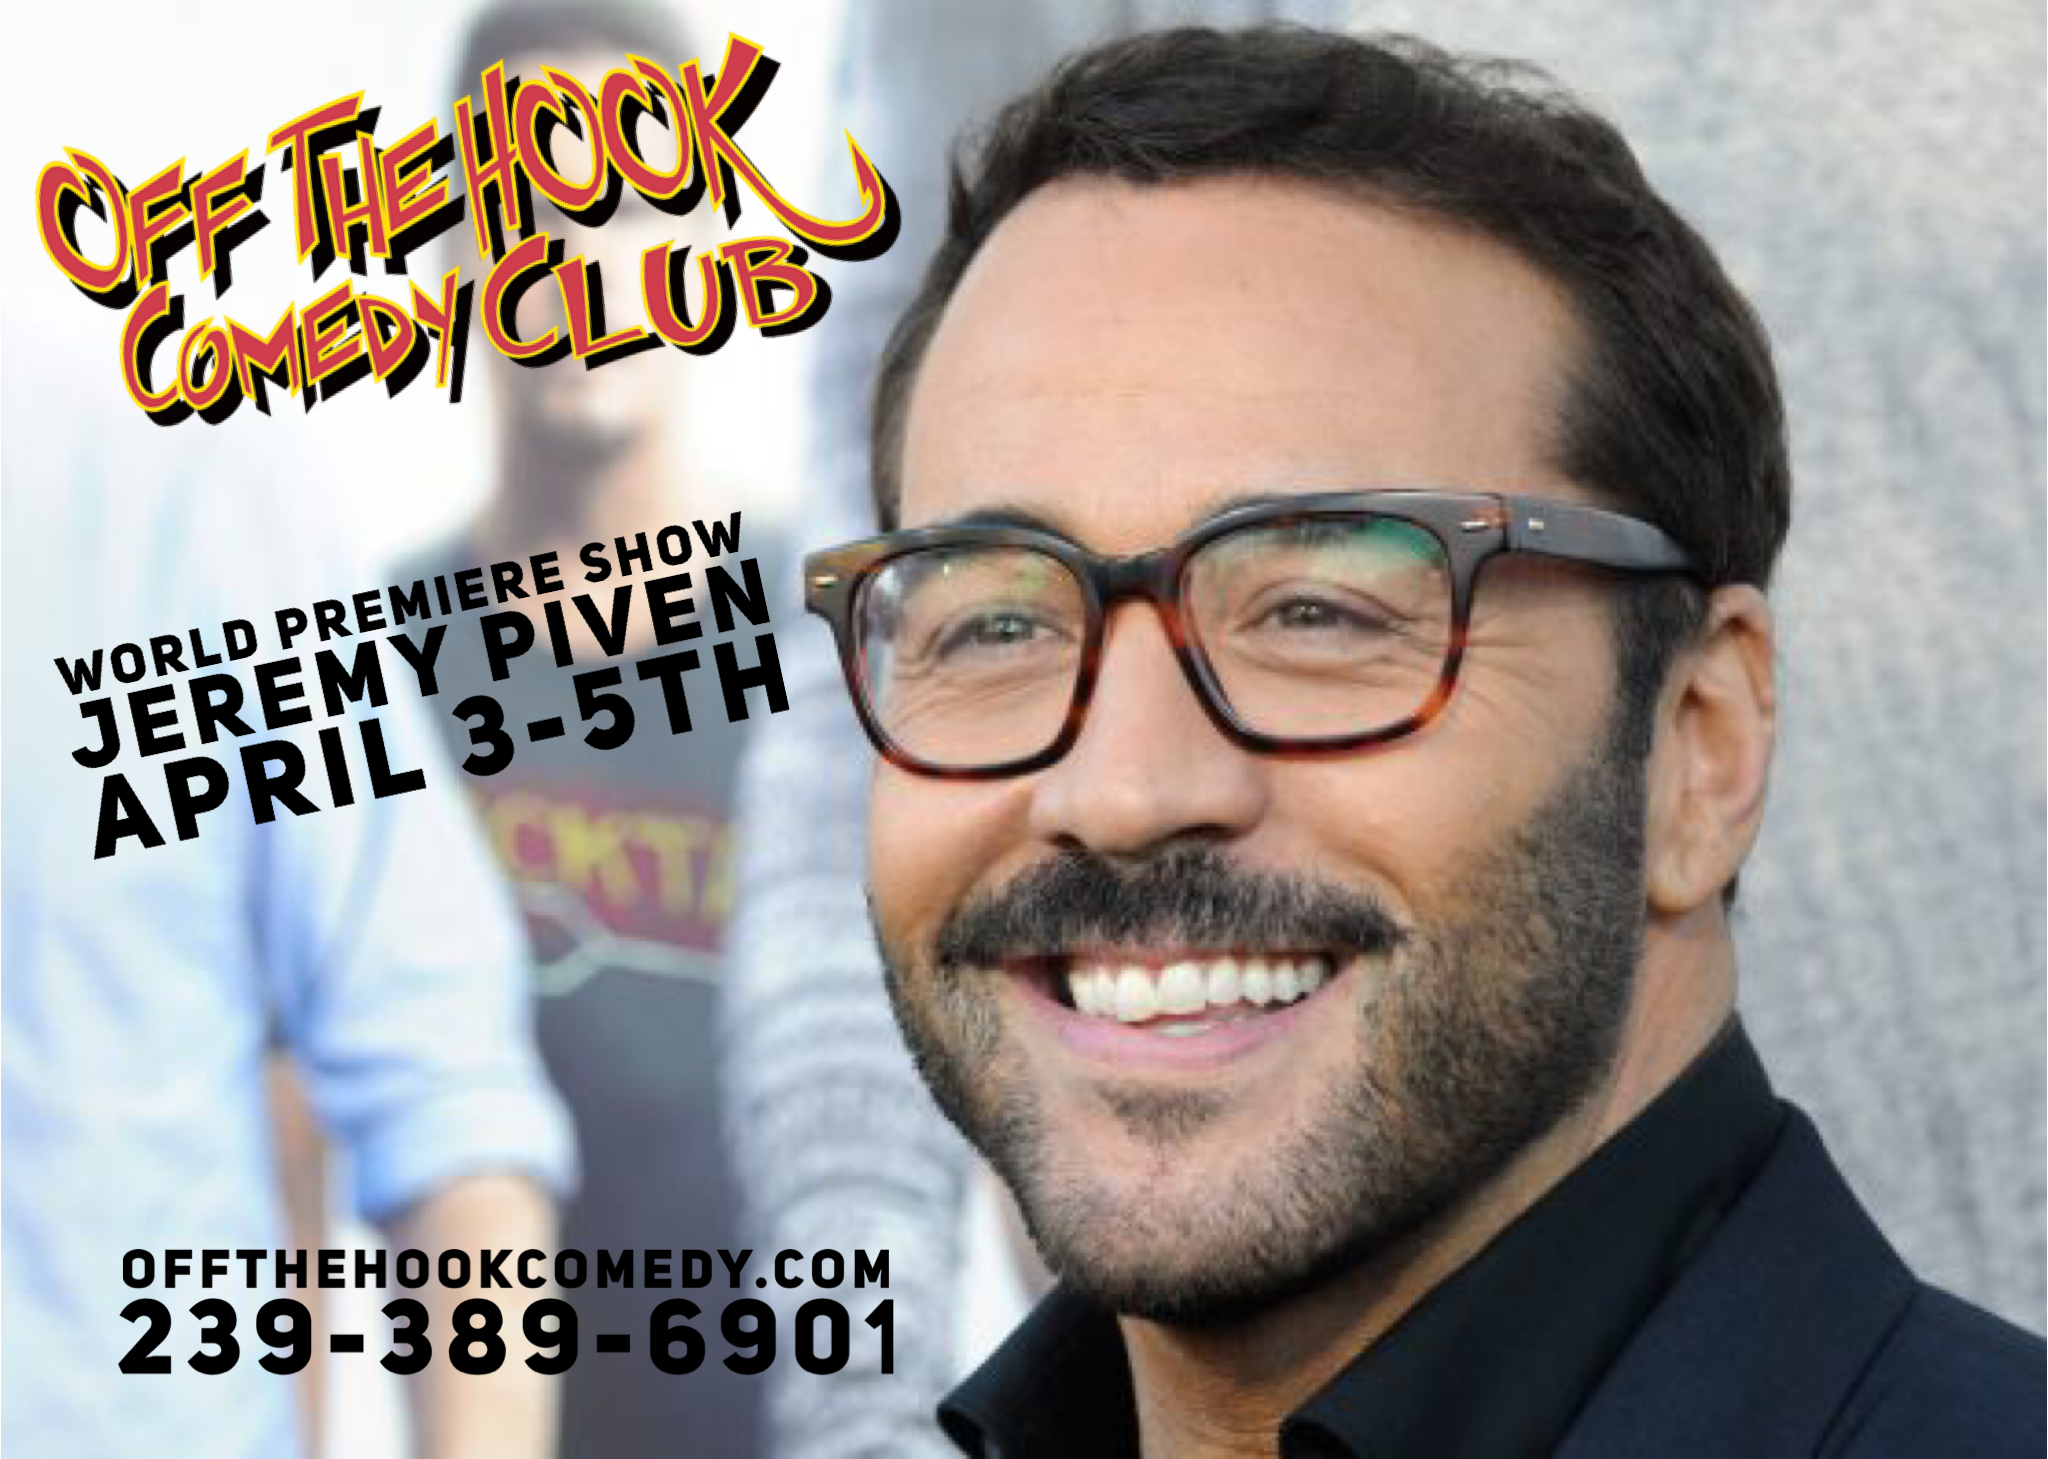 The World Premiere of Jeremy Piven Comedy Tour live in Naples, Florida